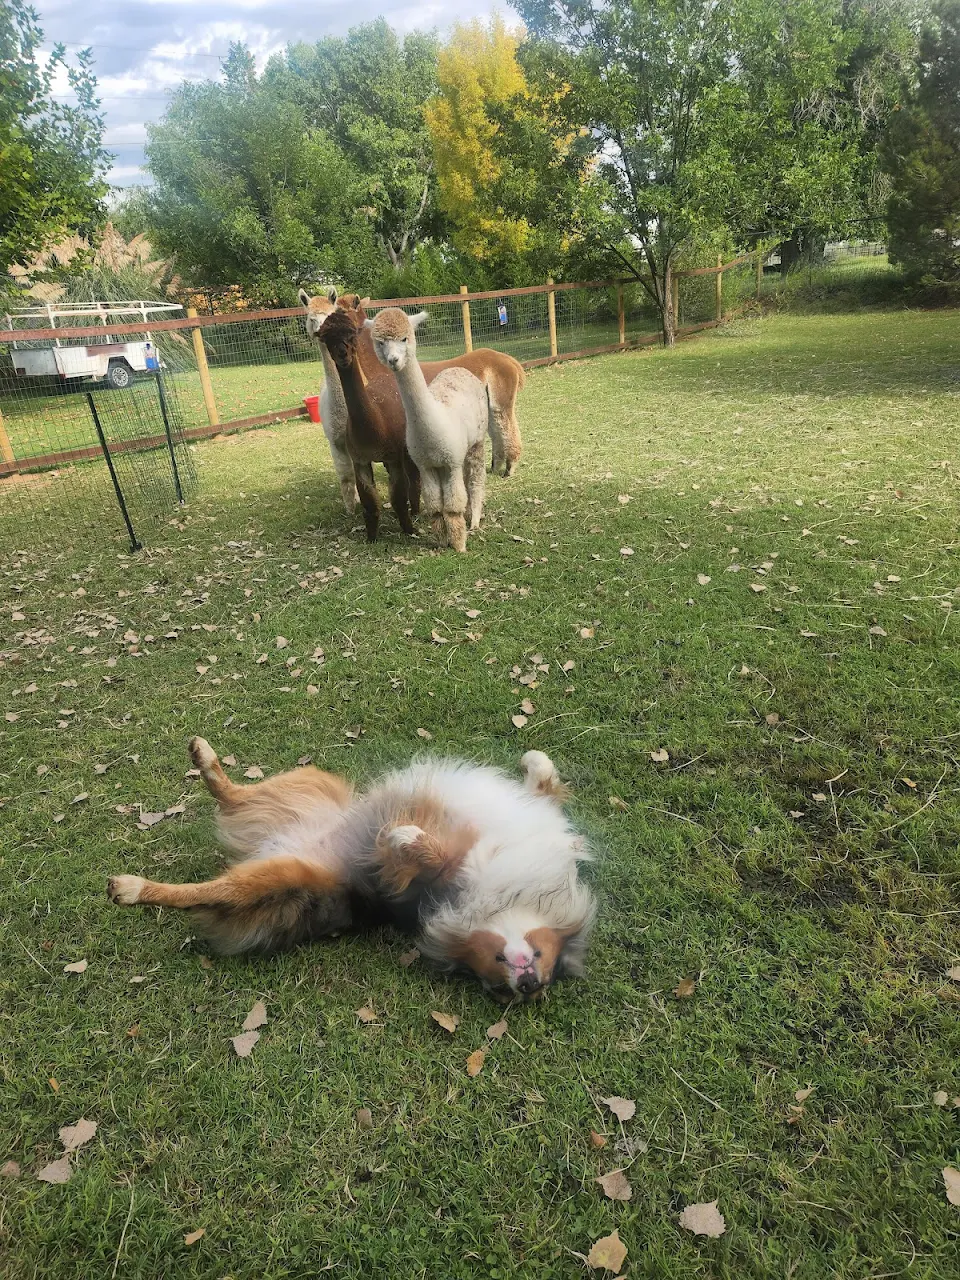 Herding abilities have temporarily been disabled due to urgent back scratches.